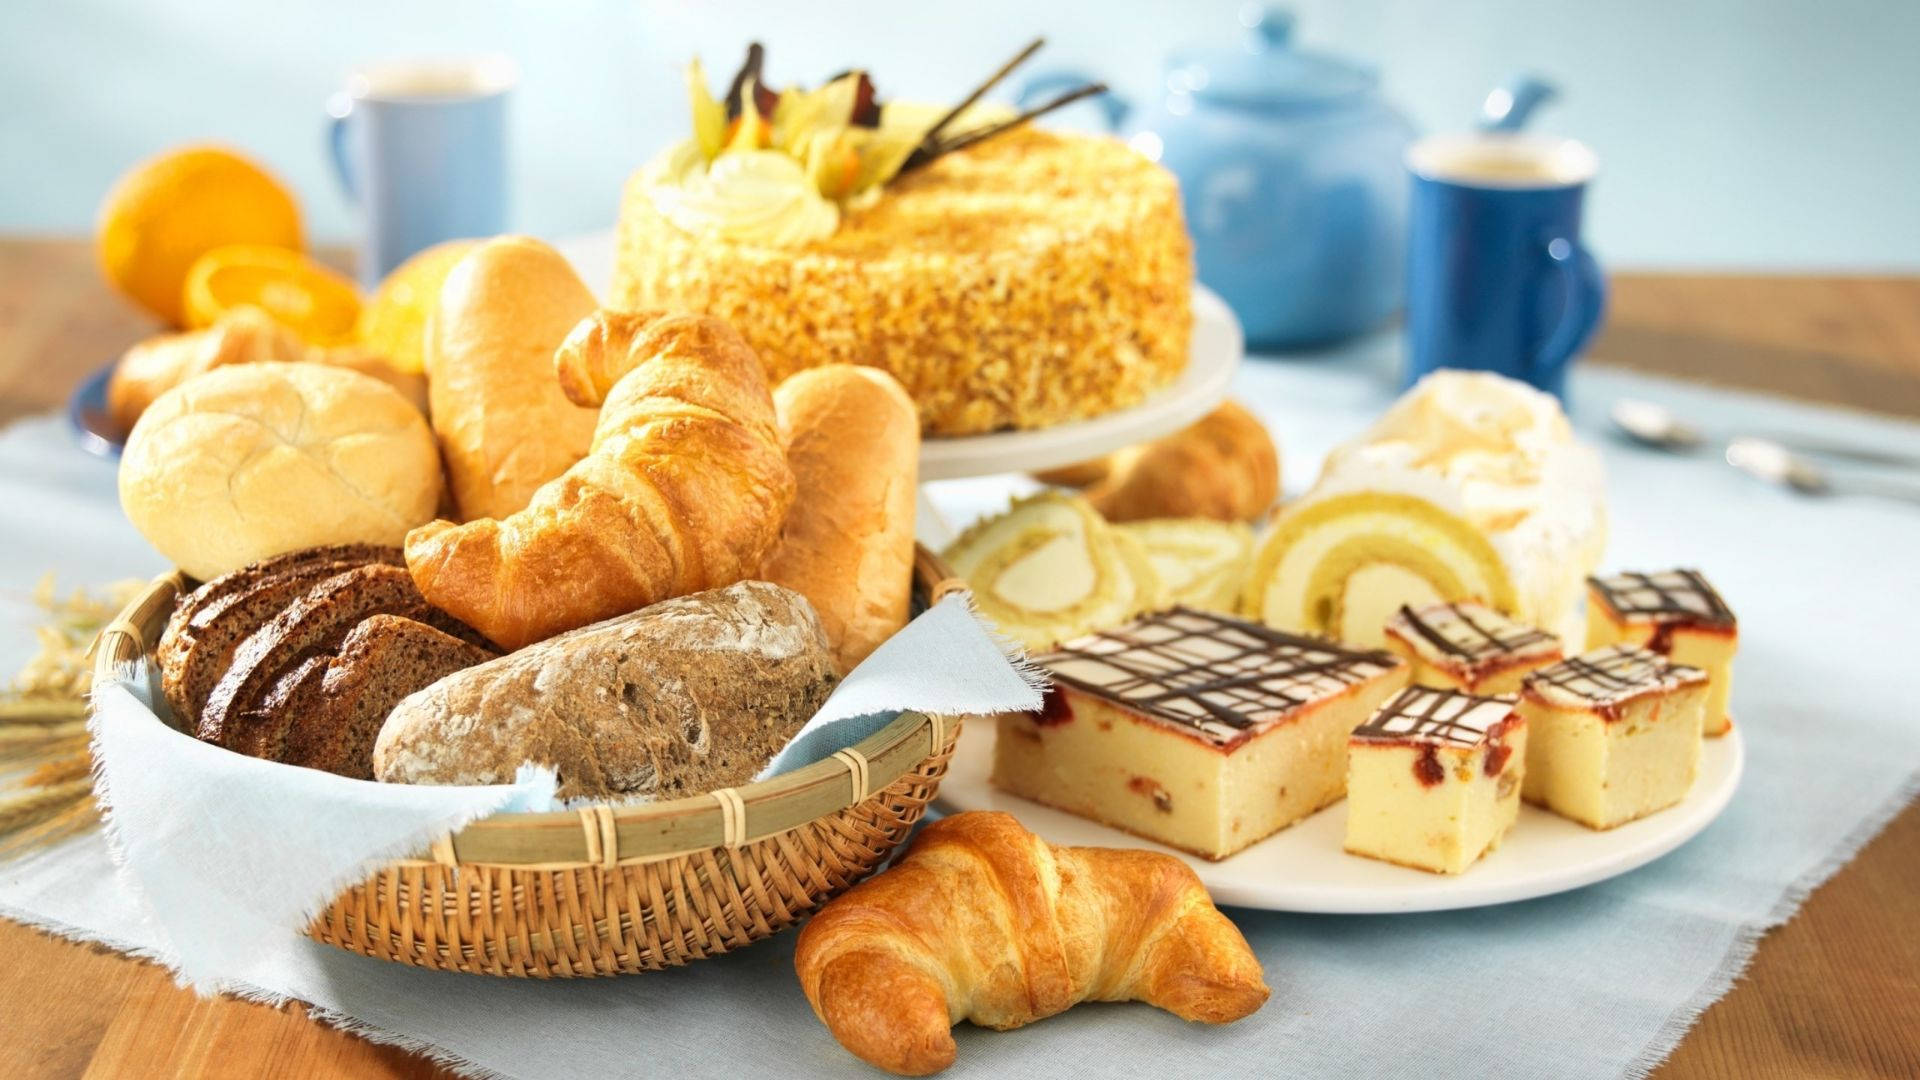 Breads With Desserts Background